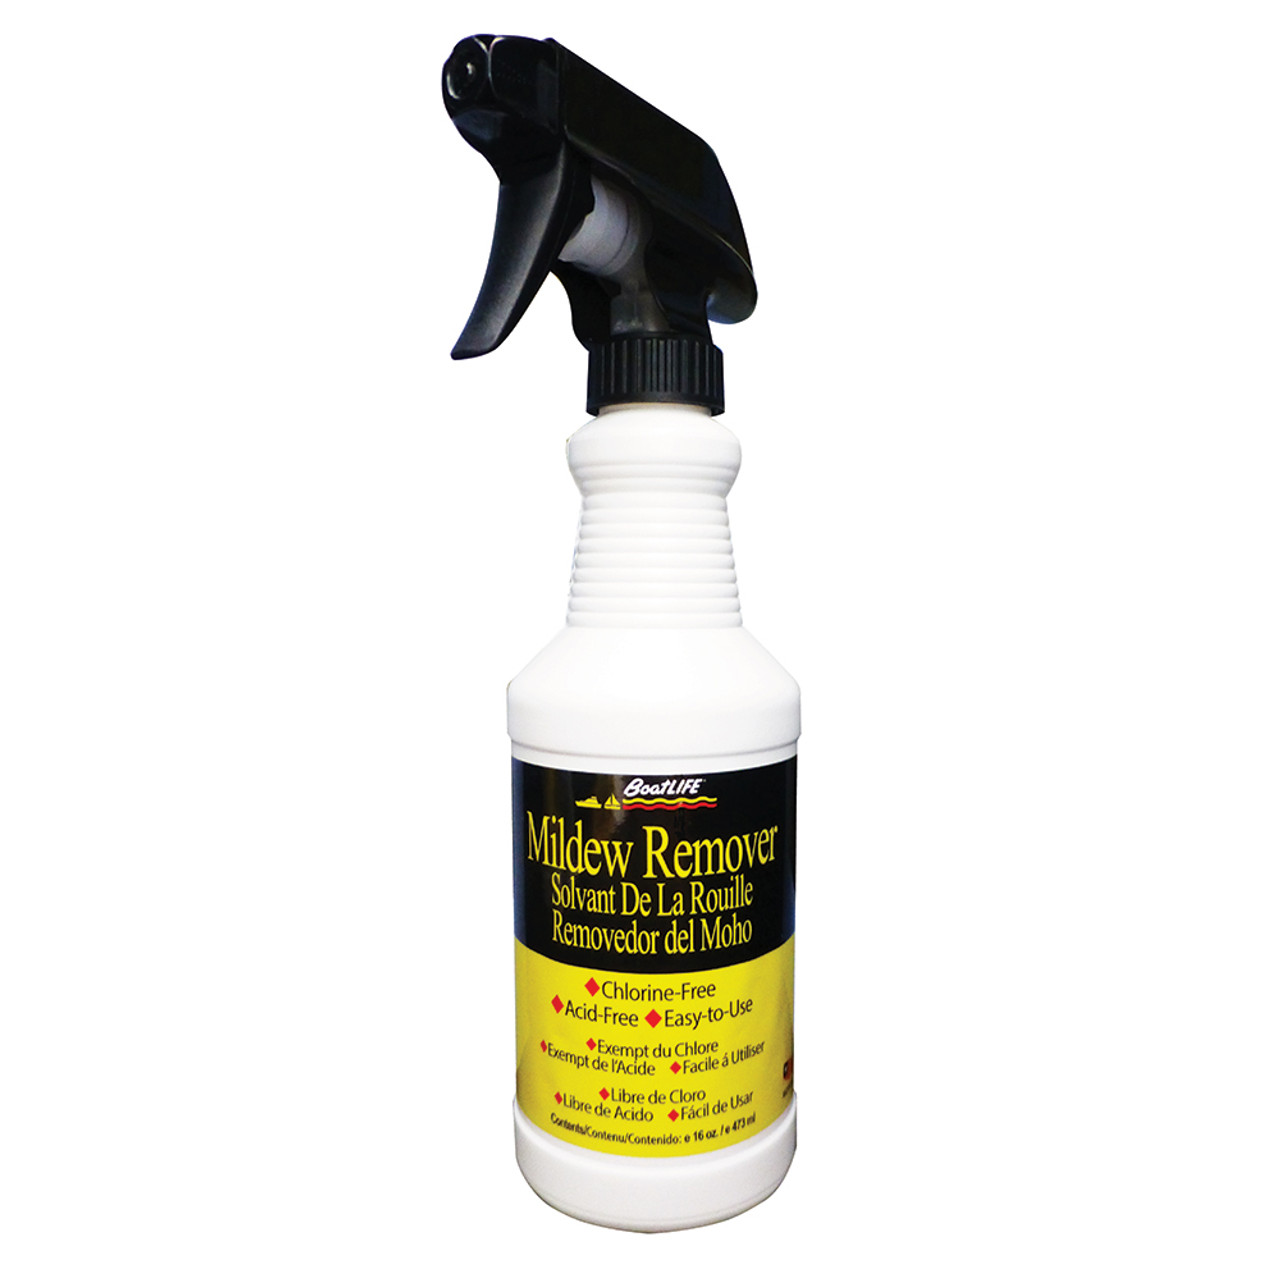 Mildew Remove, boat and yacht cleaning products